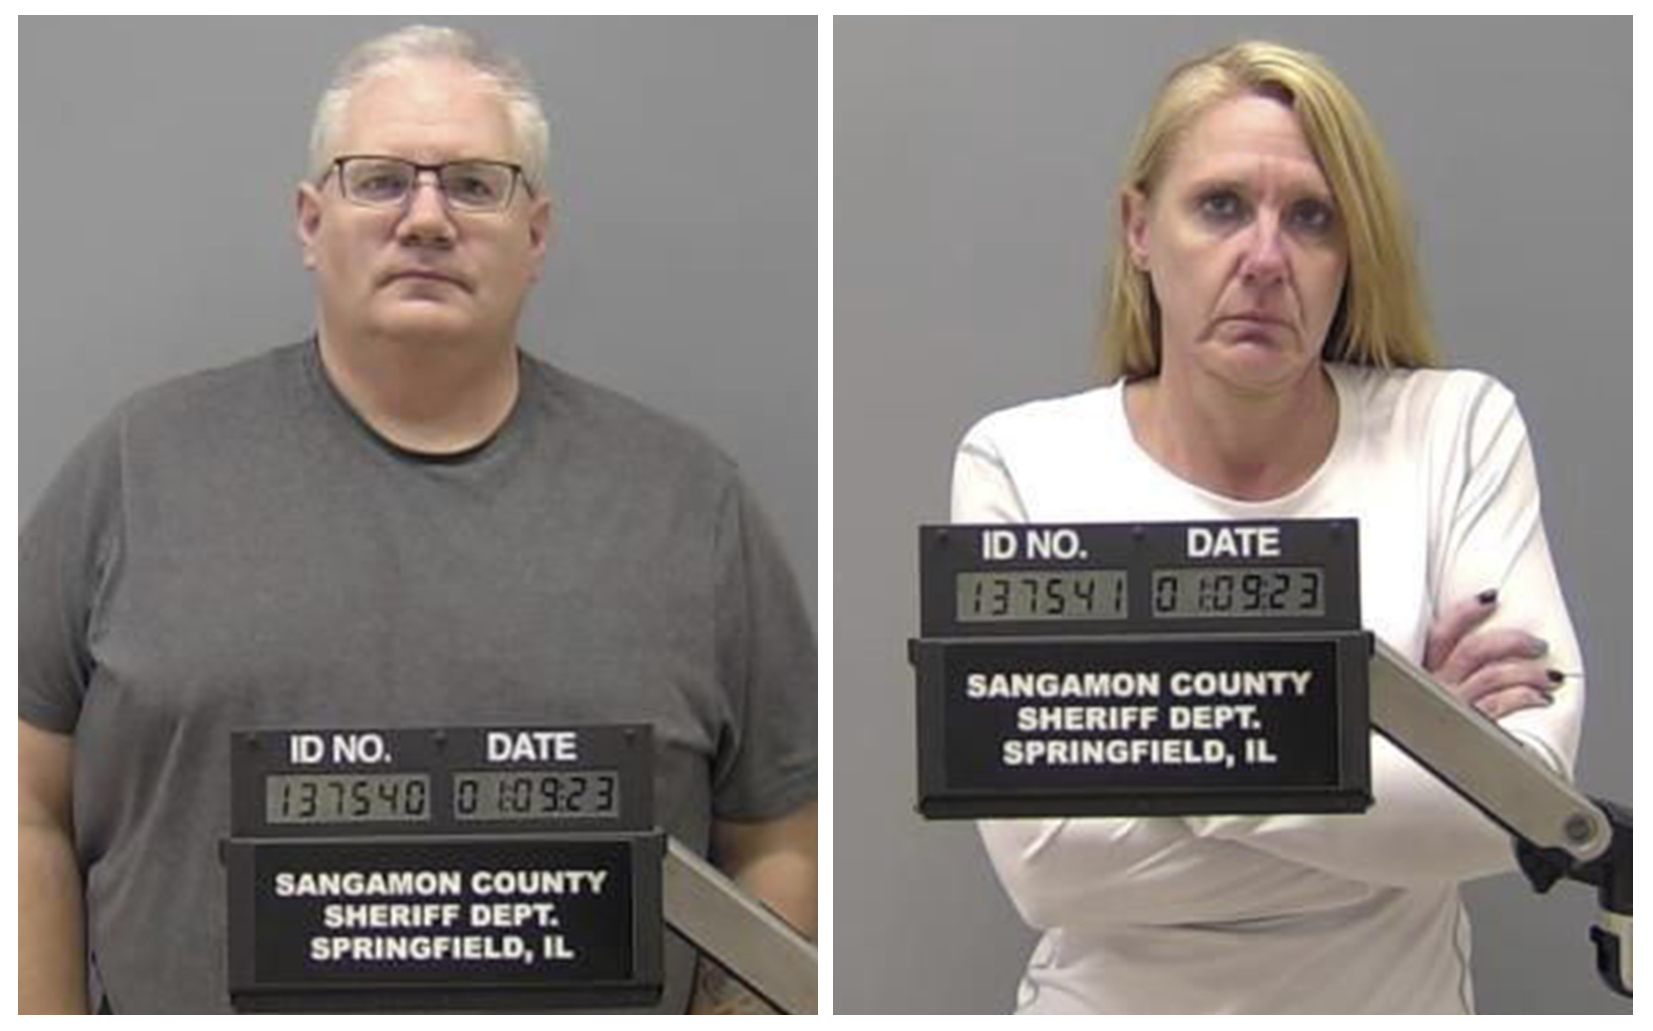 Ambulance workers Peter J. Cadigan, left, and Peggy Jill Finley are facing first-degree murder charges and now a civil lawsuit over the death of a patient they are accused of strapping face down on a stretcher while taking him to a hospital Dec. 18.